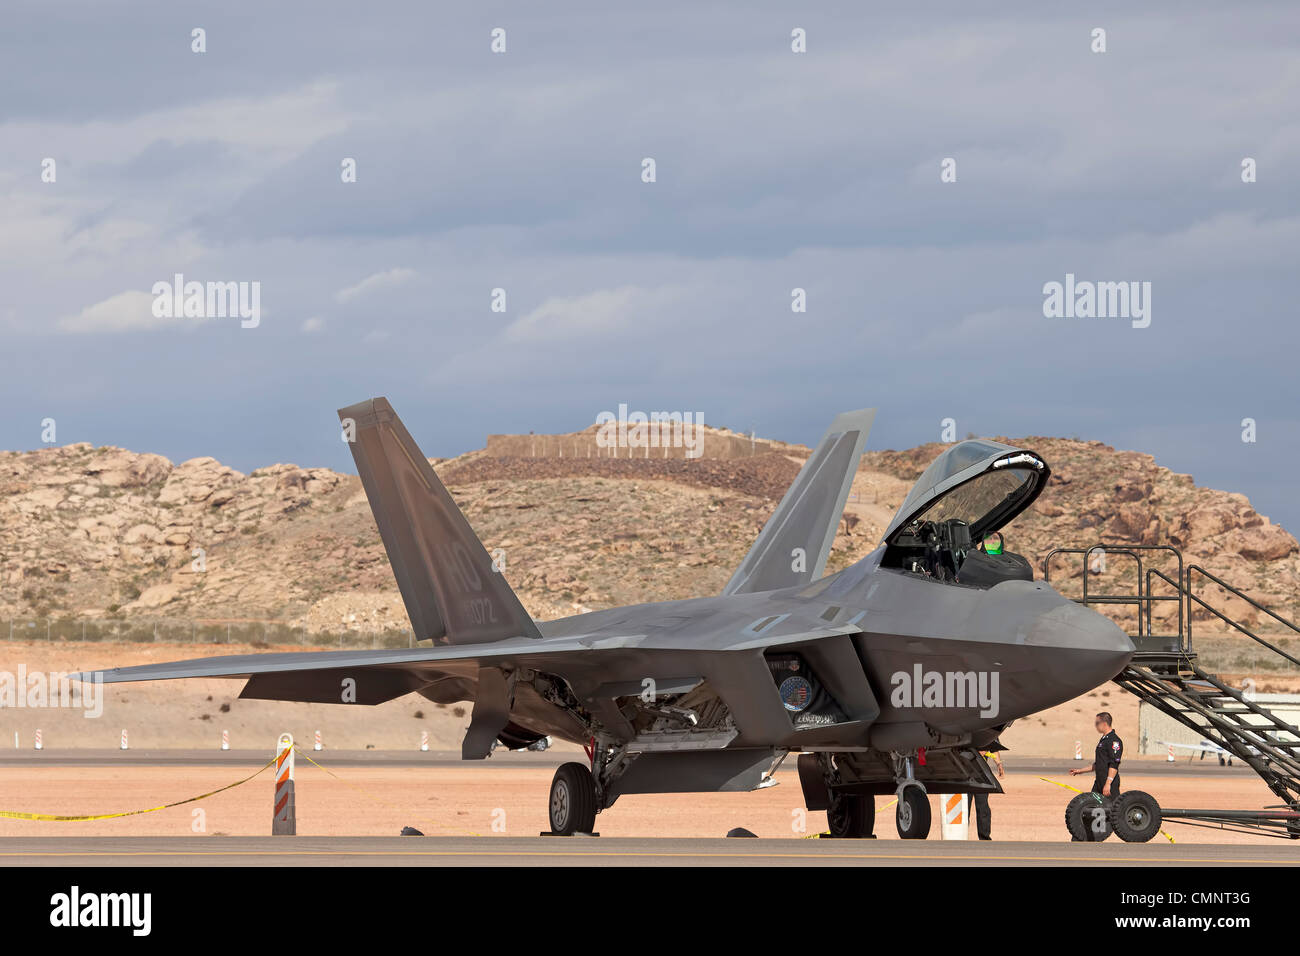 Aircraft F-22 Raptor USAF air supremacy superiority fighter aircraft and crew by runway. Desert location. Stock Photo